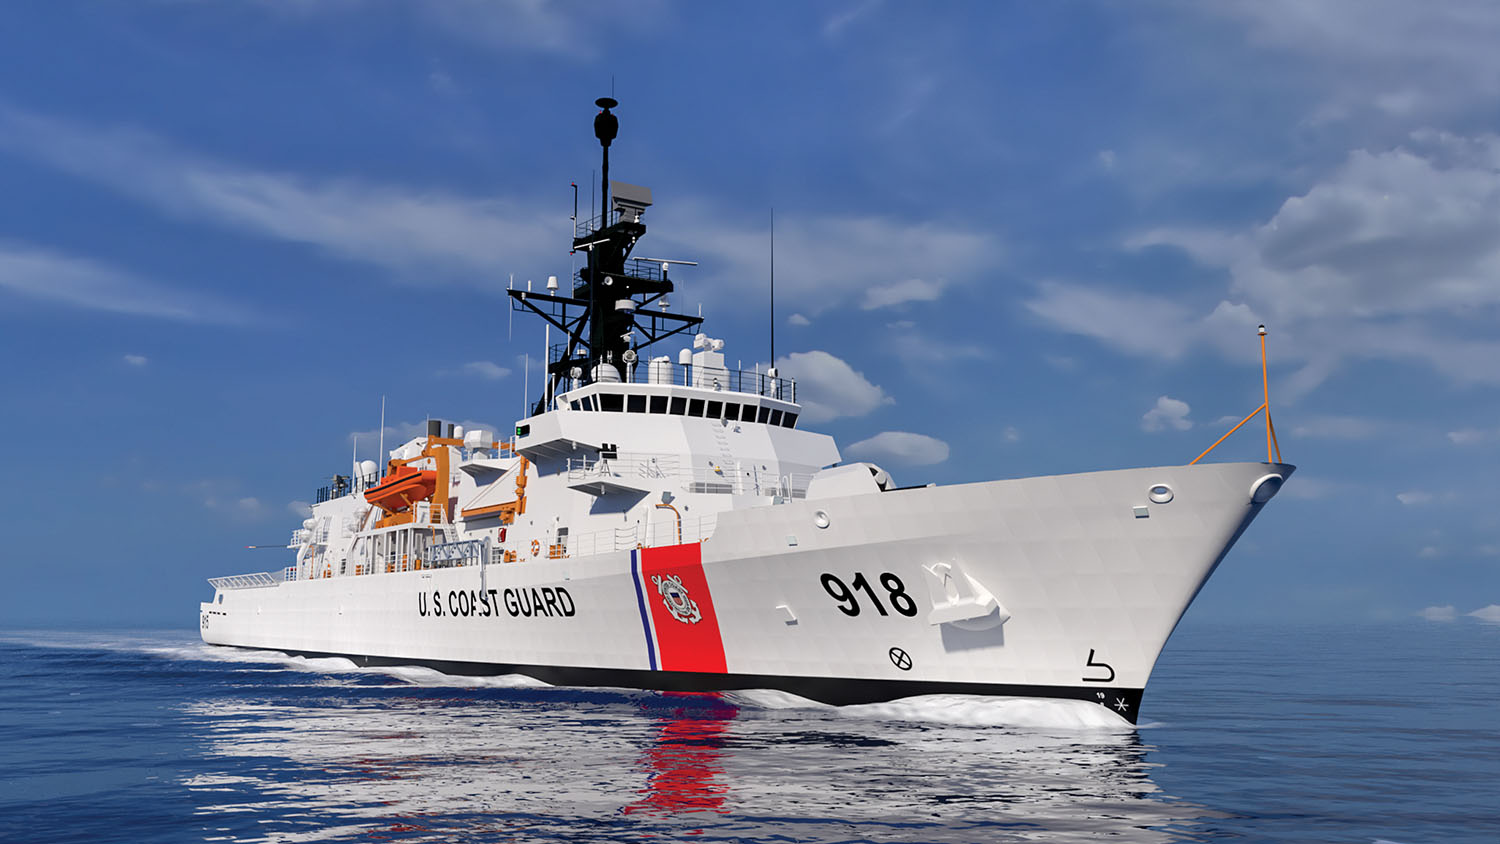 Eastern Announces Contract For 4th Offshore Patrol Cutter